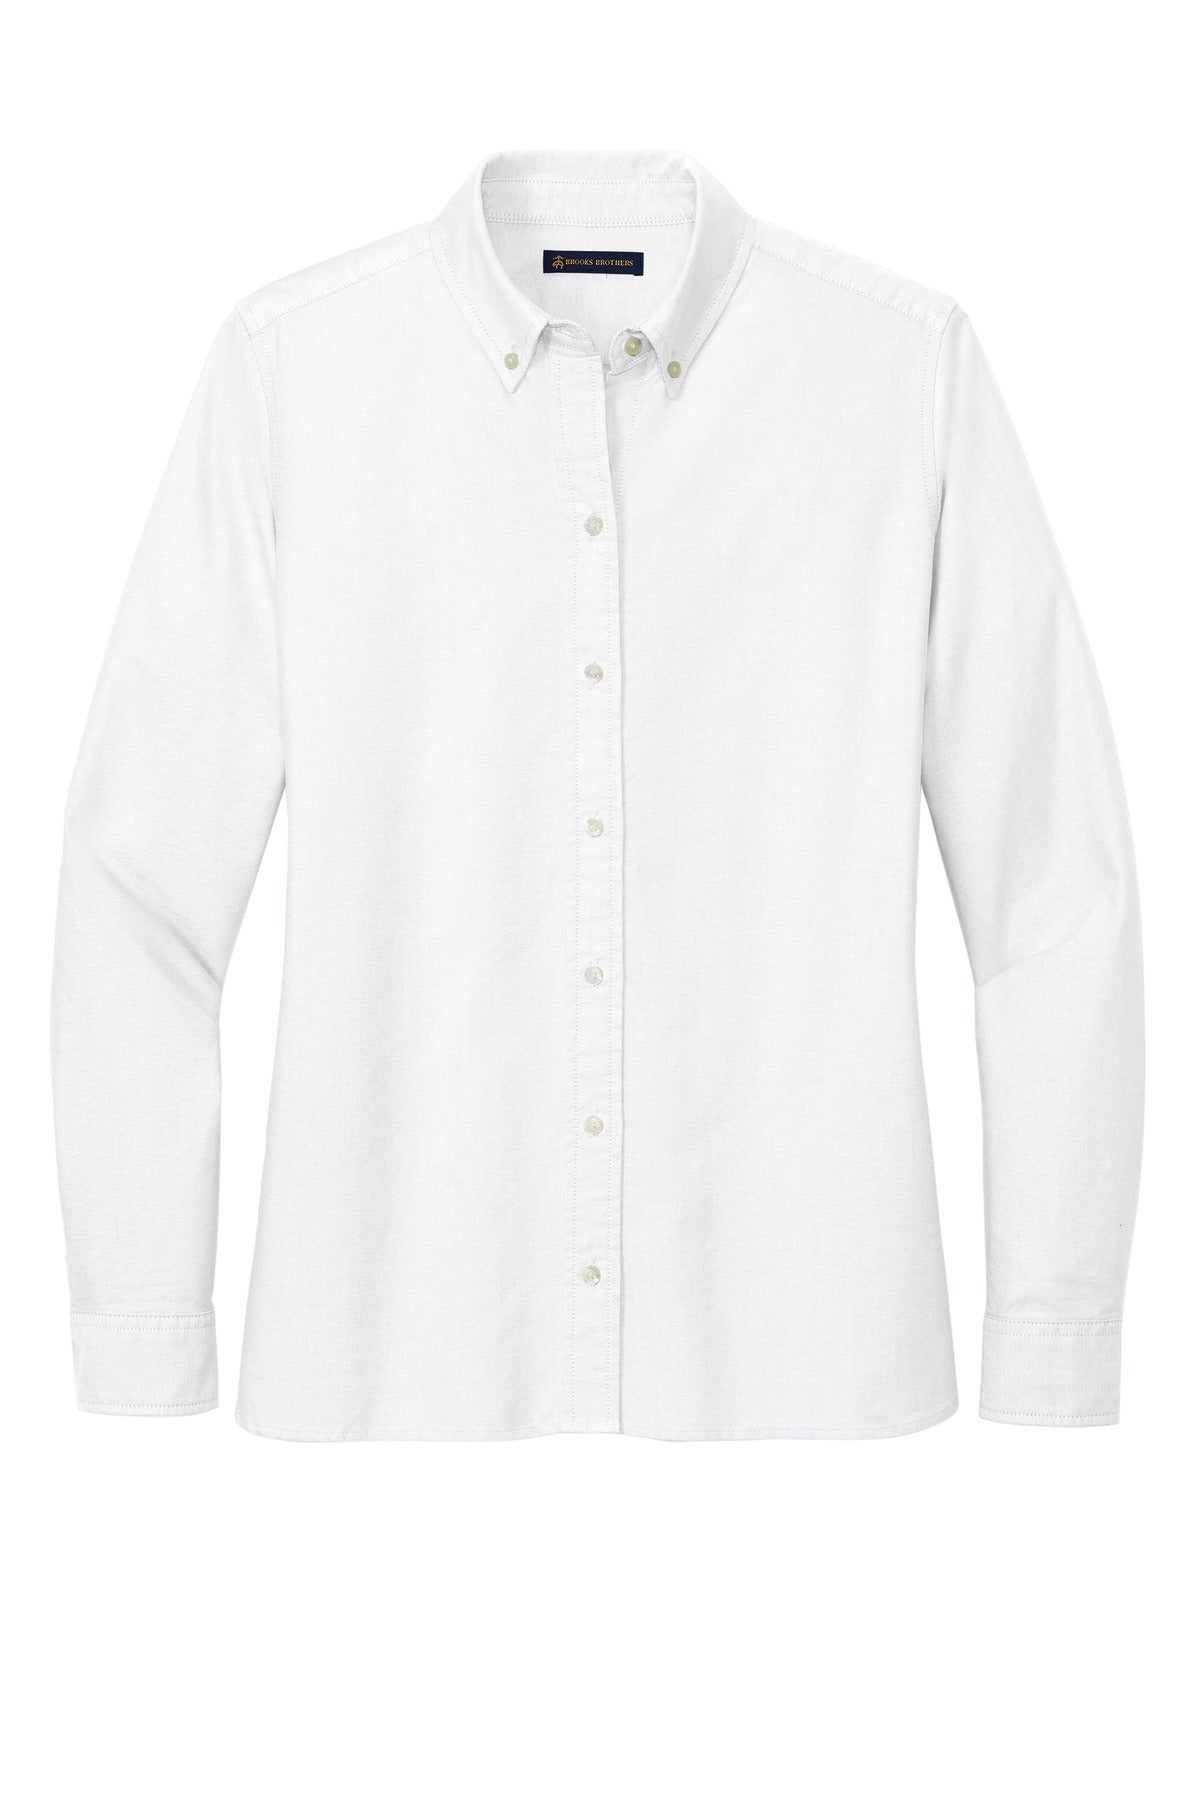 Brooks Brothers® Women's Casual Oxford Cloth Shirt BB18005